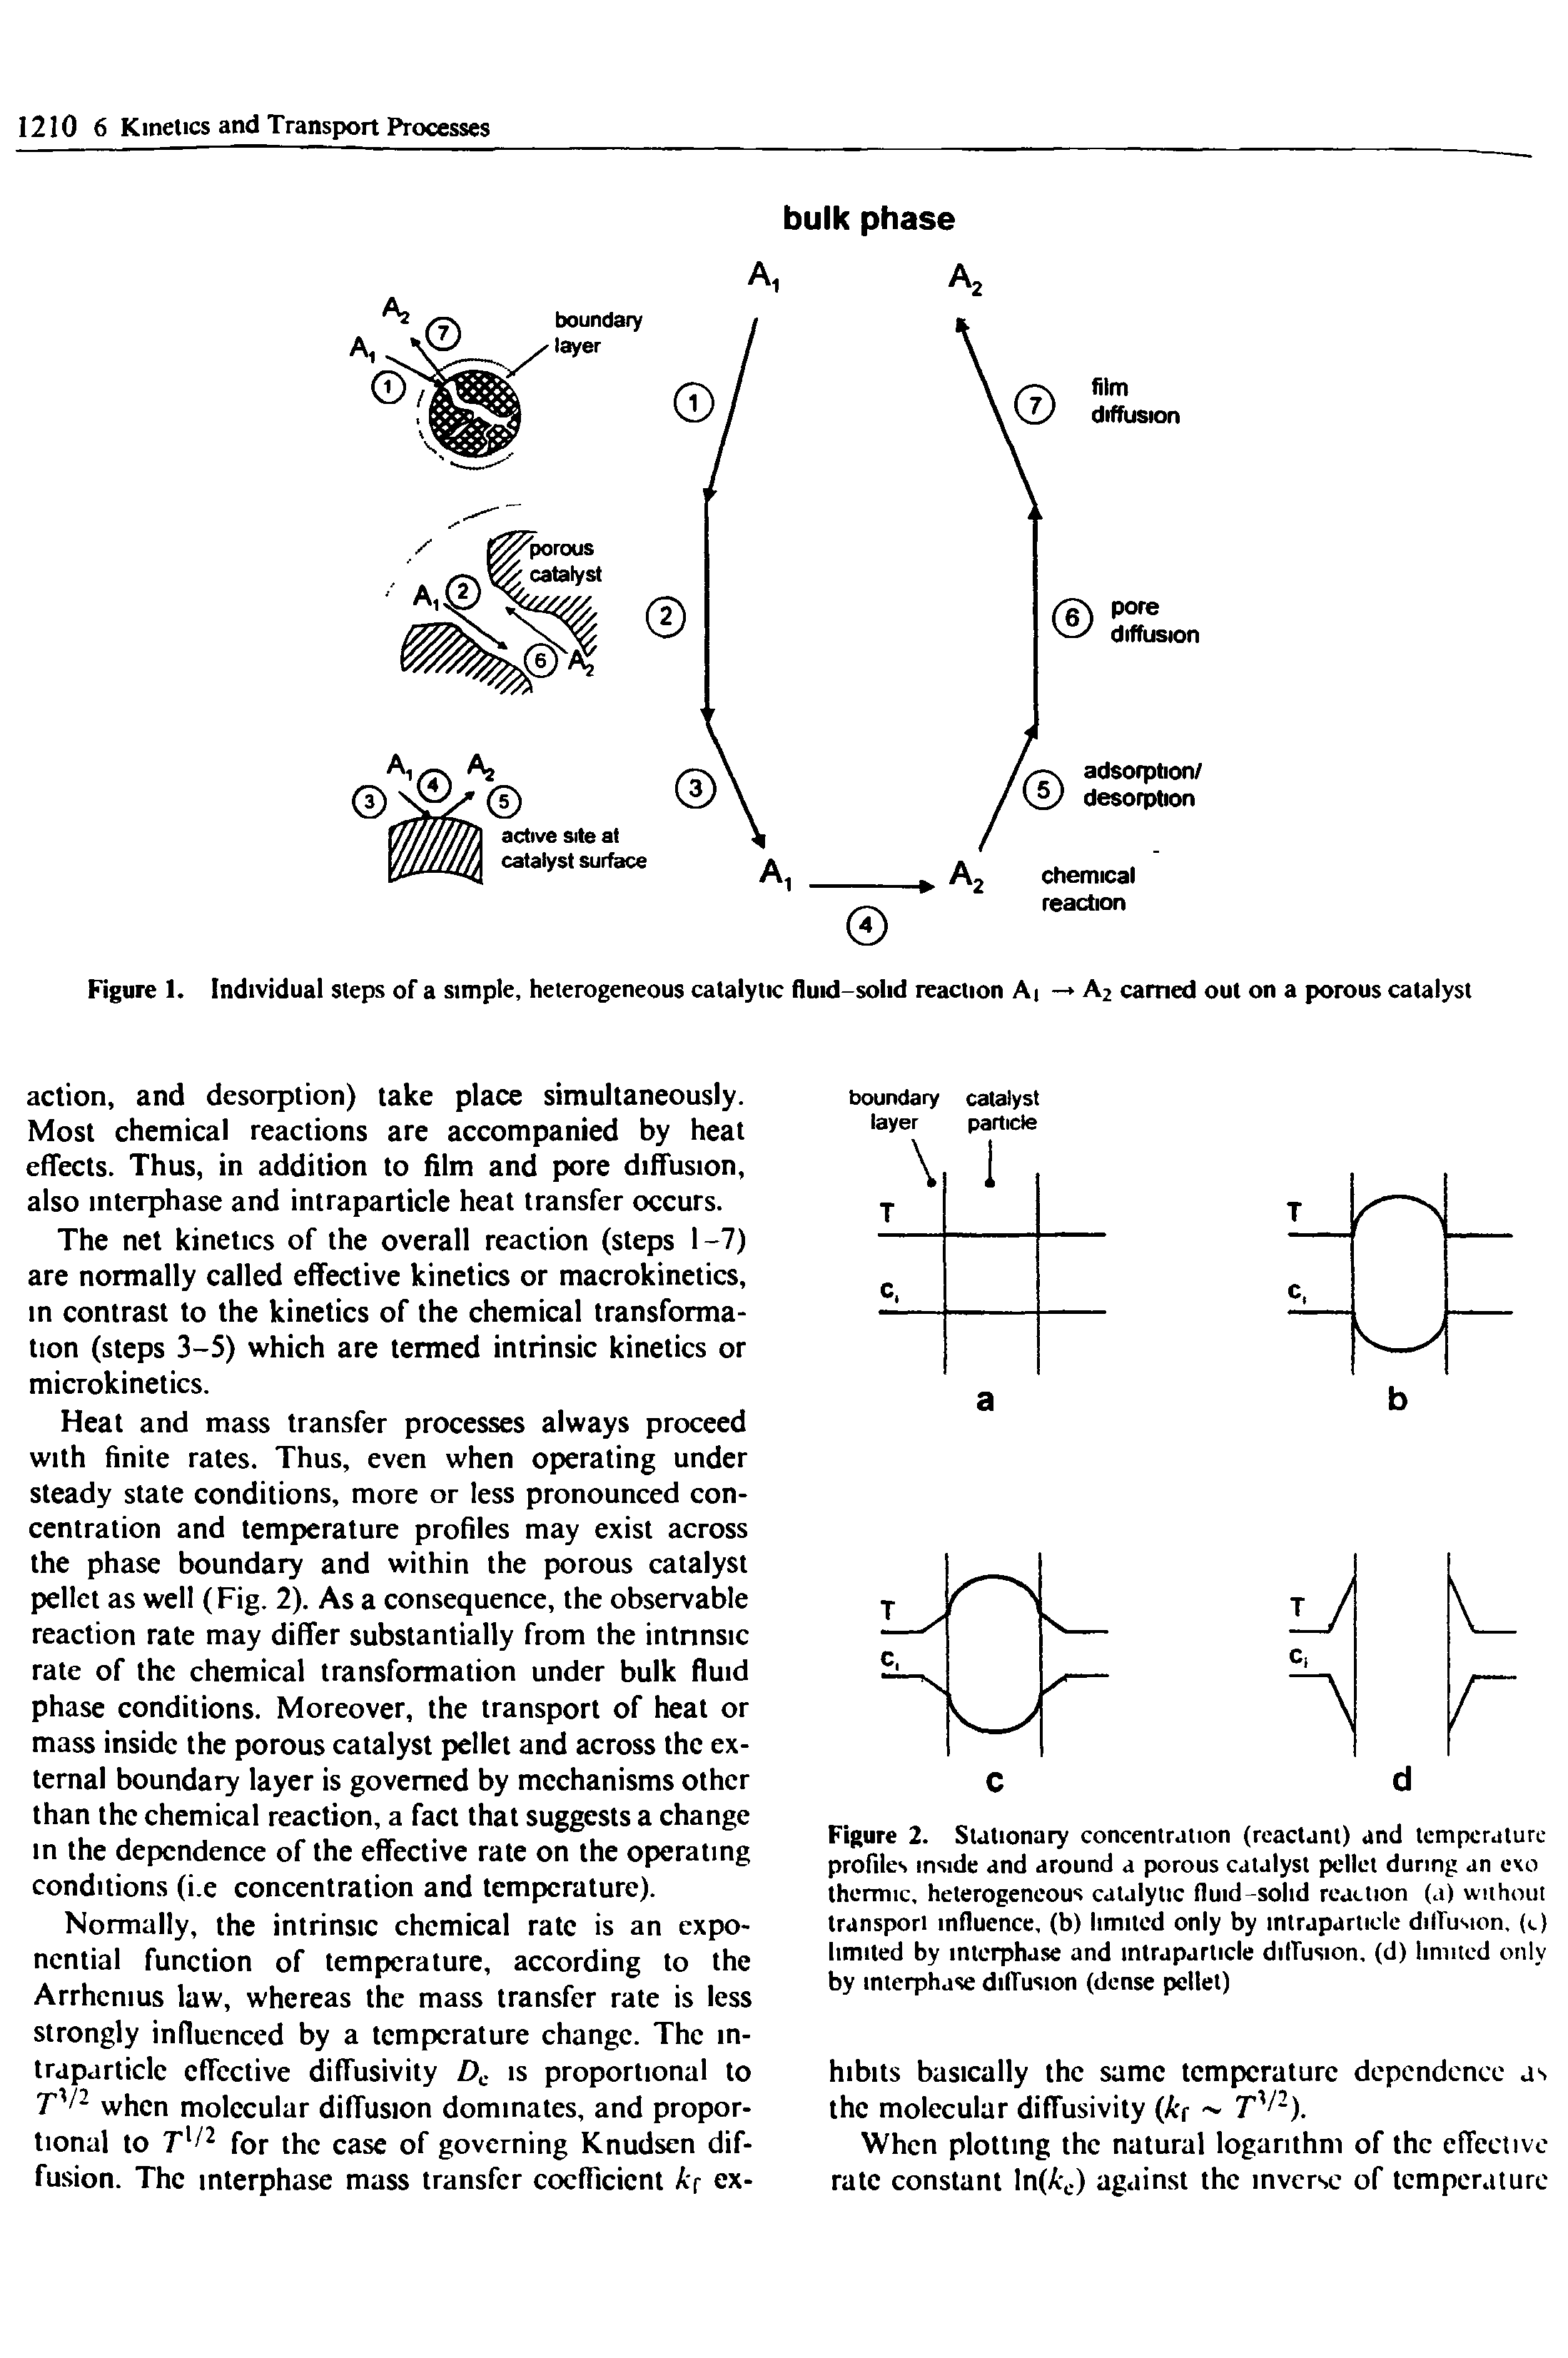 Figure 1. Individual steps of a simple, heterogeneous catalytic fluid-solid reaction A — A2 carried out on a porous catalyst...